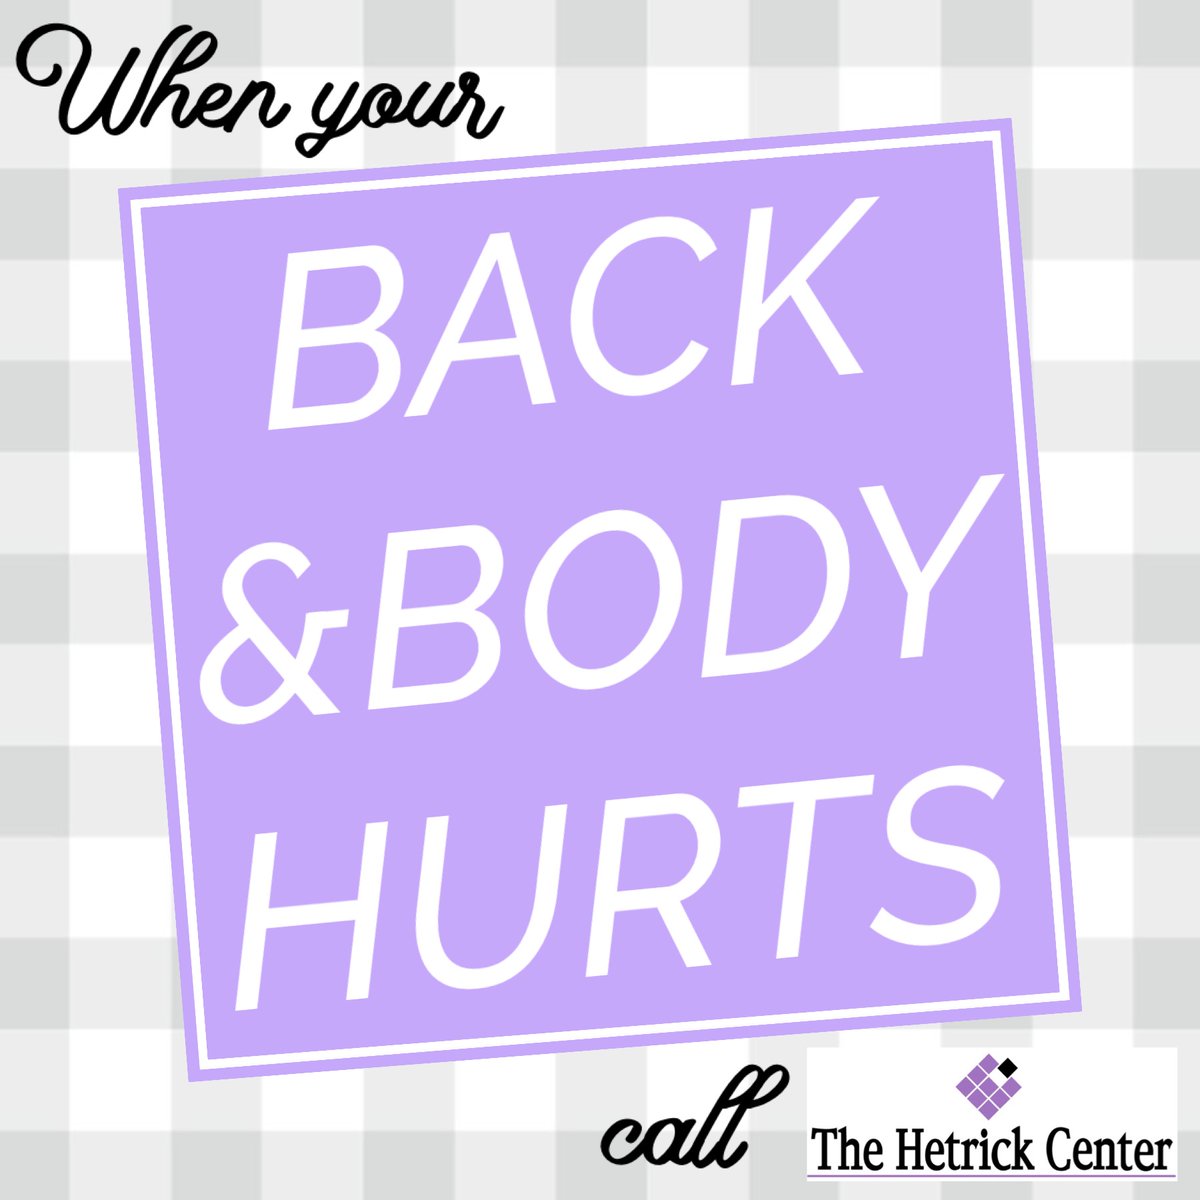 #backpain #bodypain #chiropractic #physicaltherapy #aquatictherapy #massagetherapy